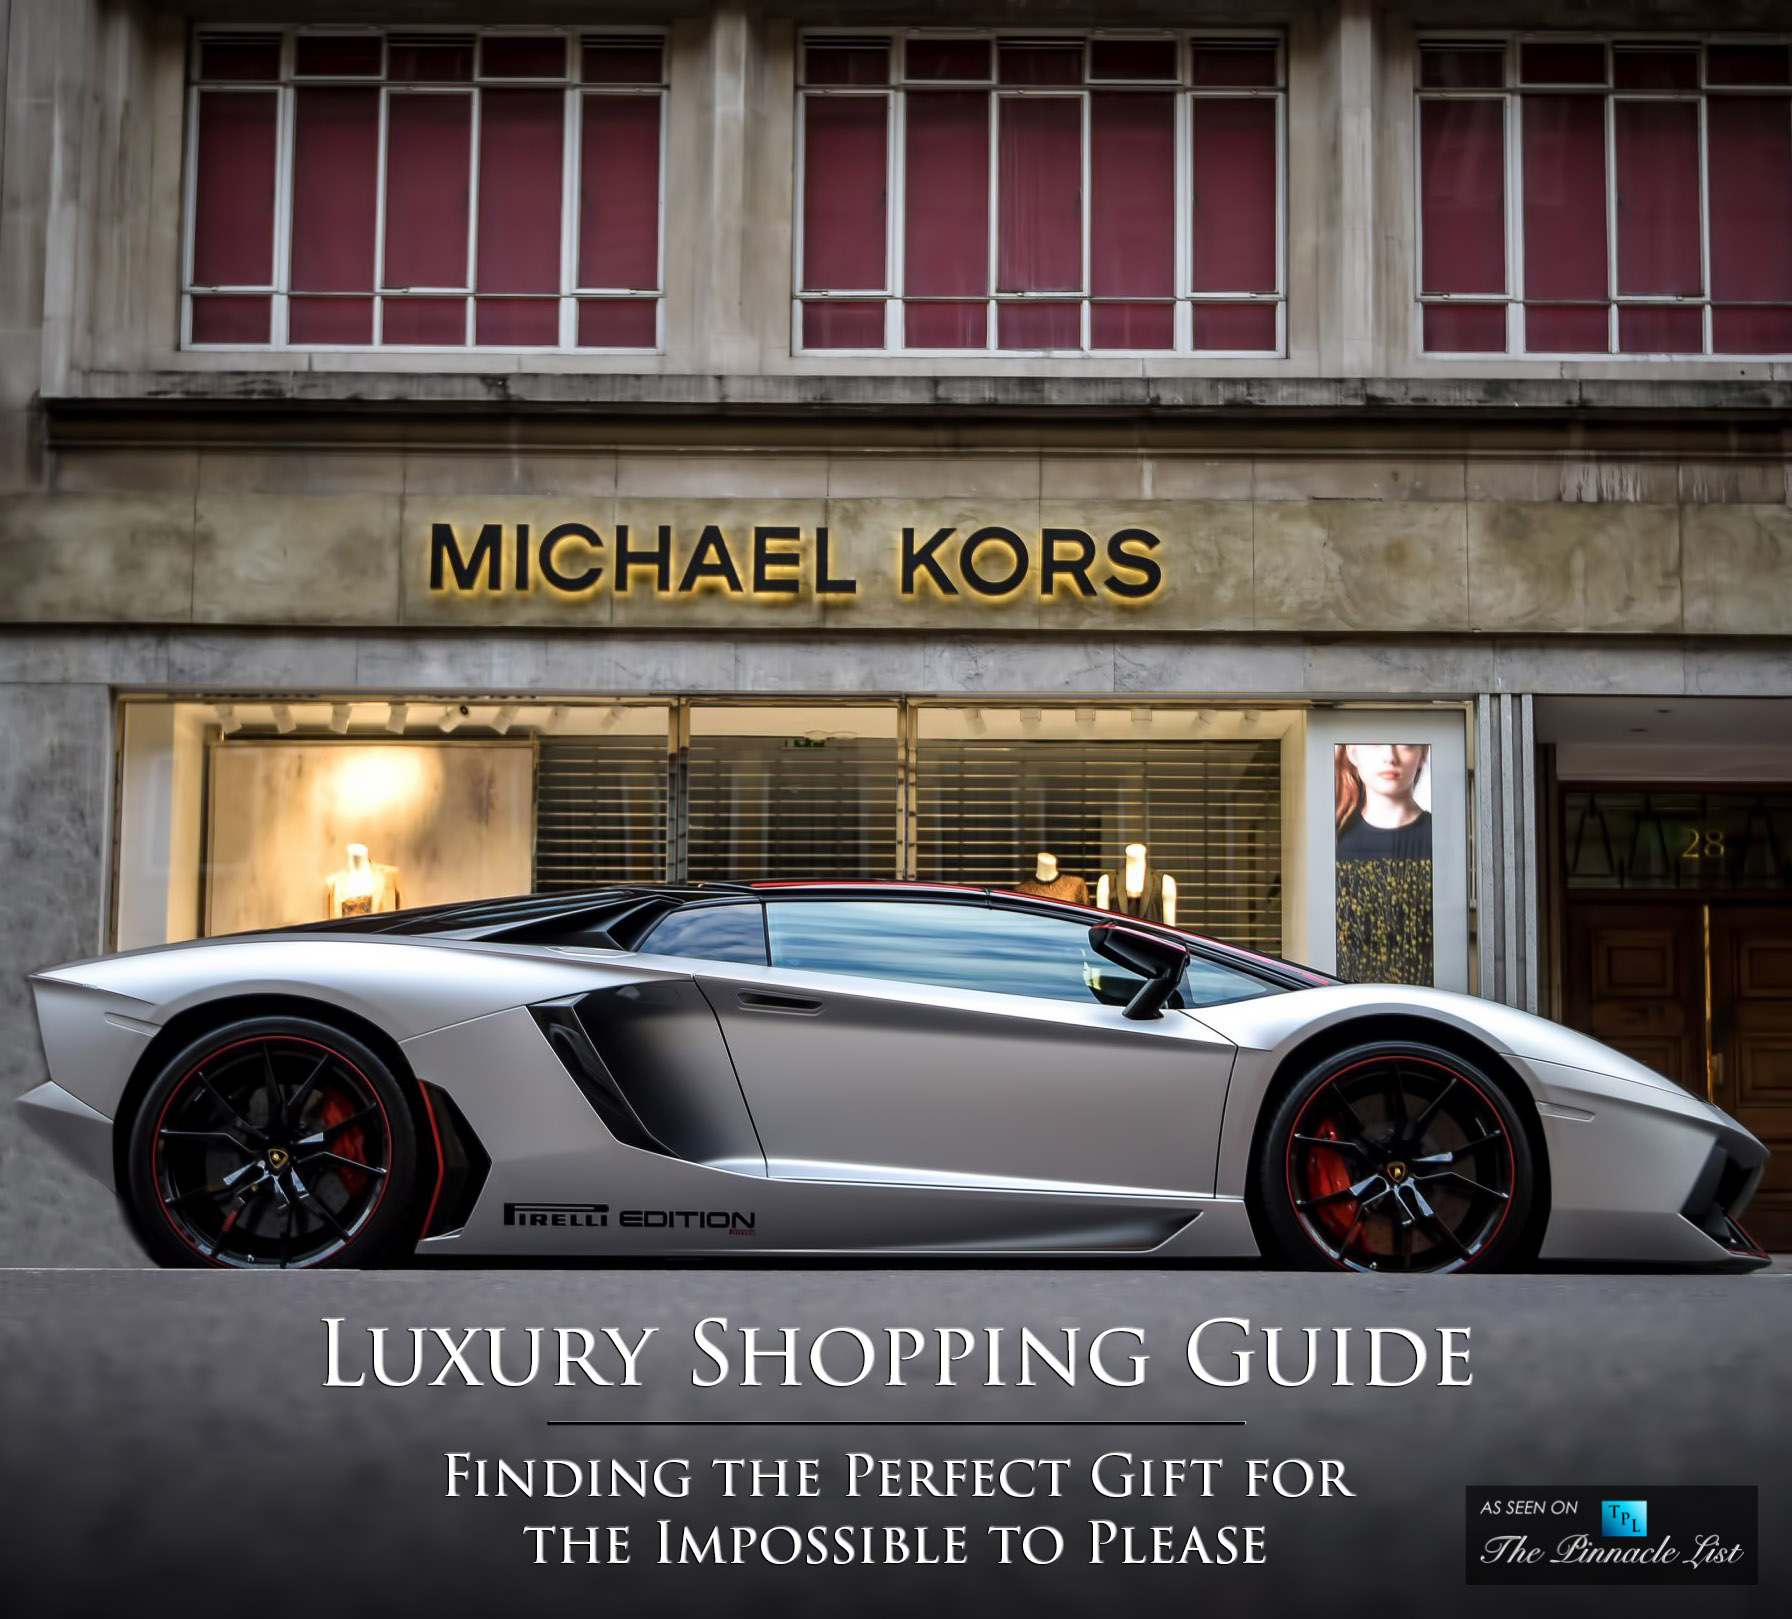 Luxury Shopping Guide – Finding the Perfect Gift for the Impossible to Please